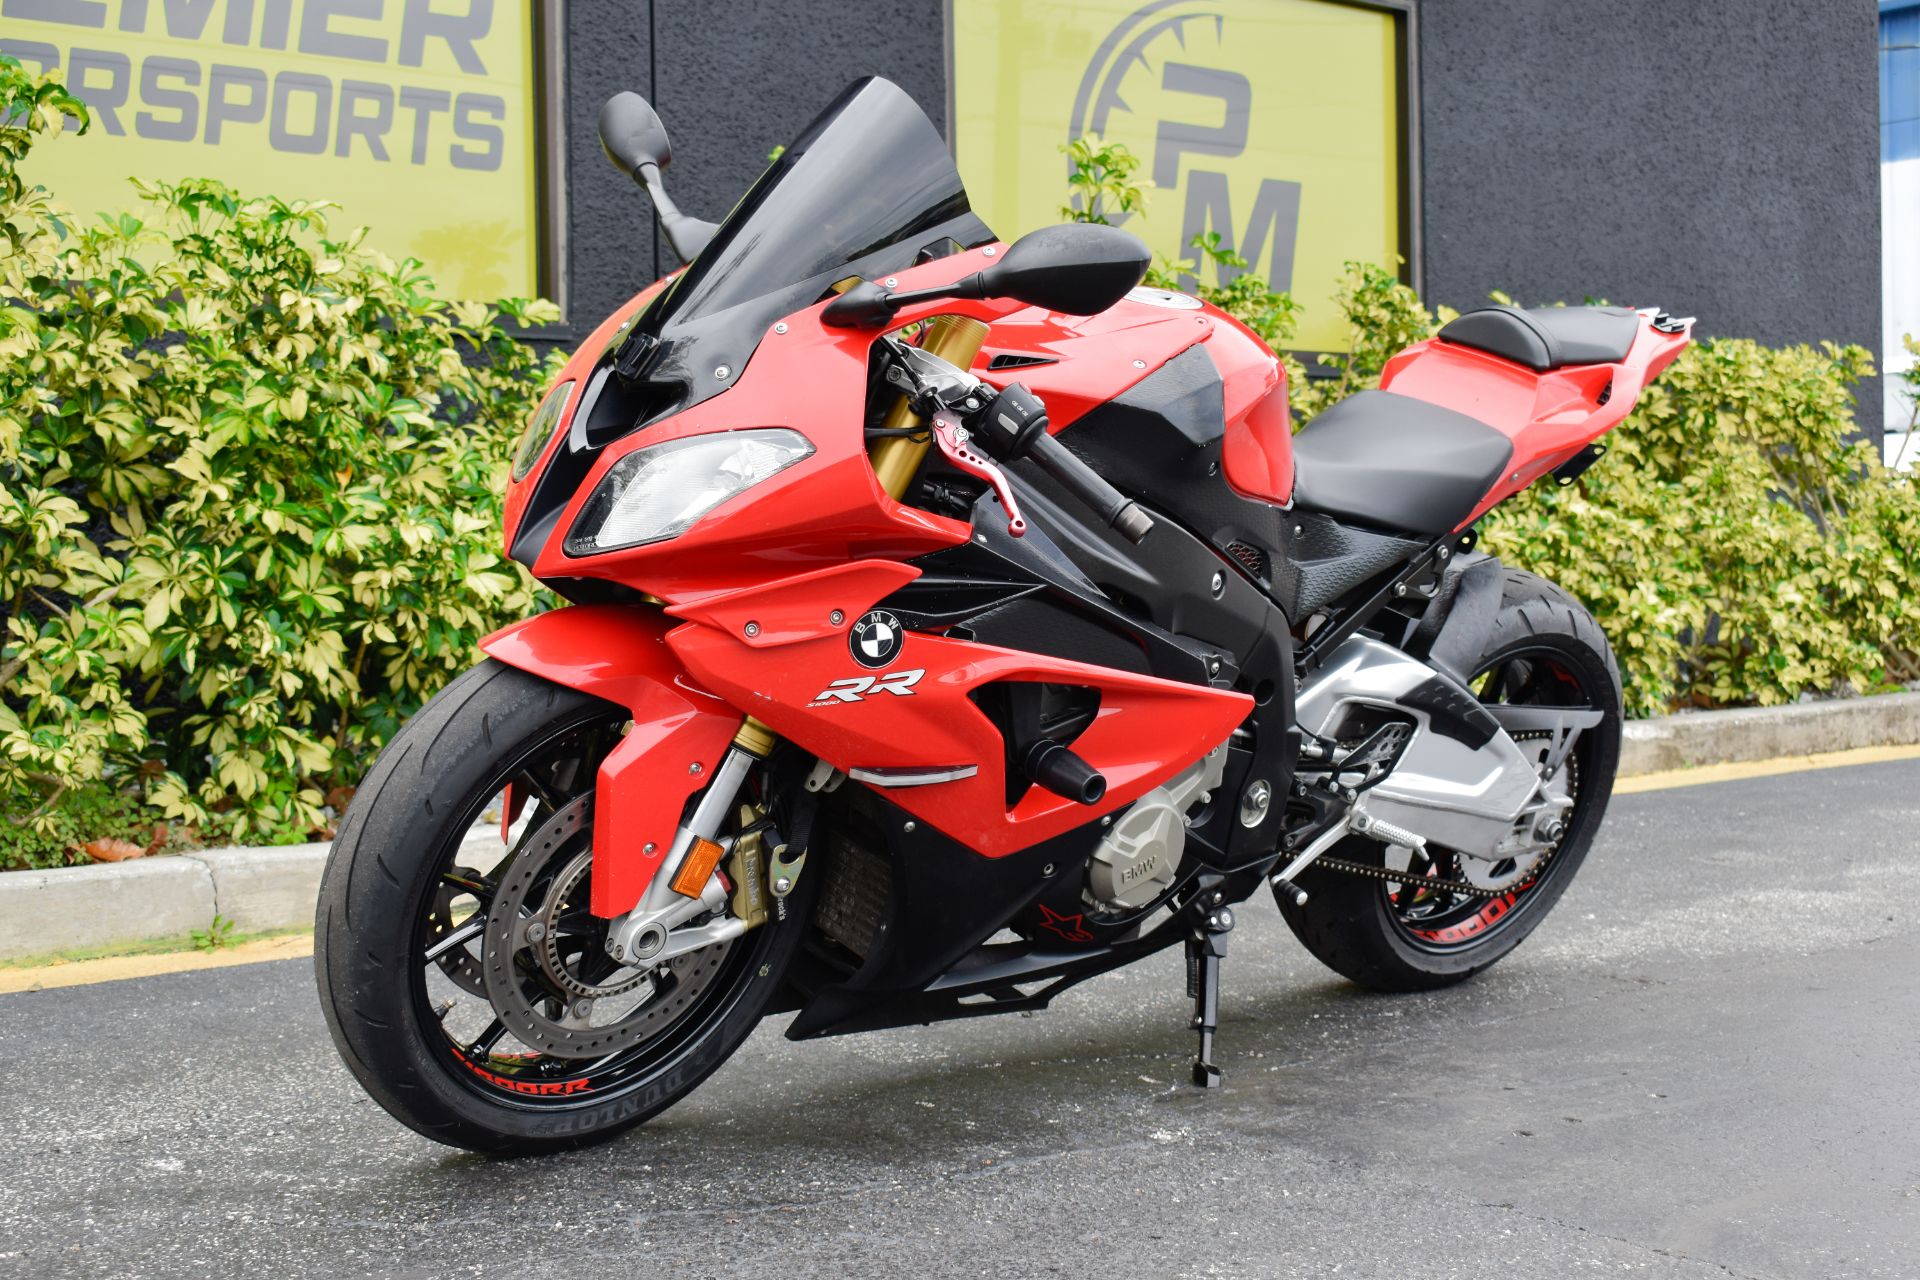 2013 BMW S 1000 RR in Jacksonville, Florida - Photo 14